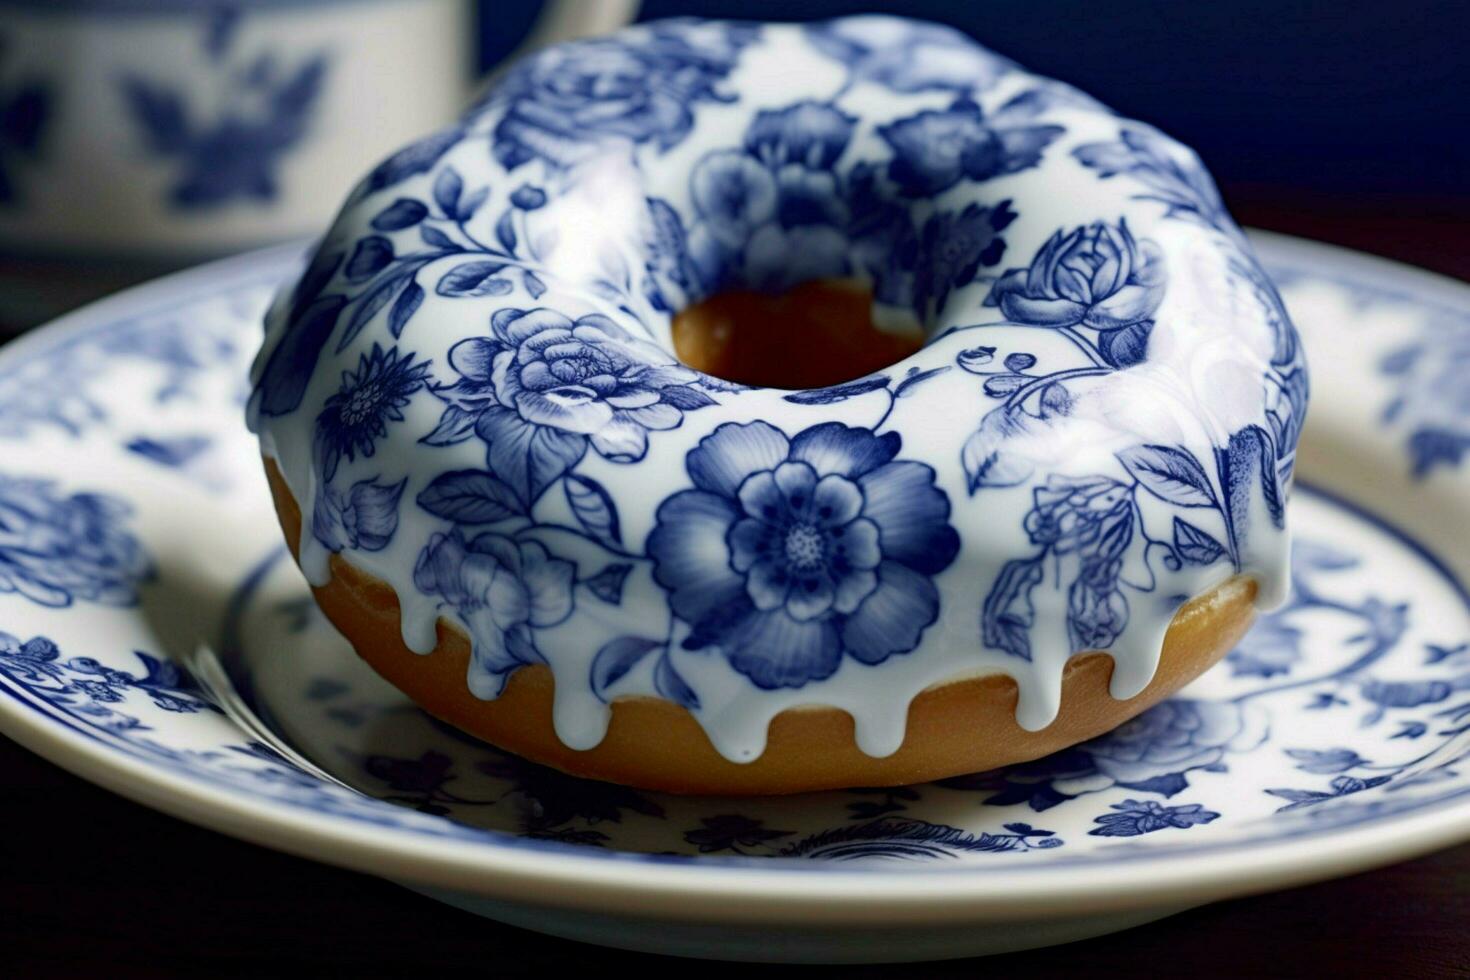 blue delft floral print donut icing food photograph photo